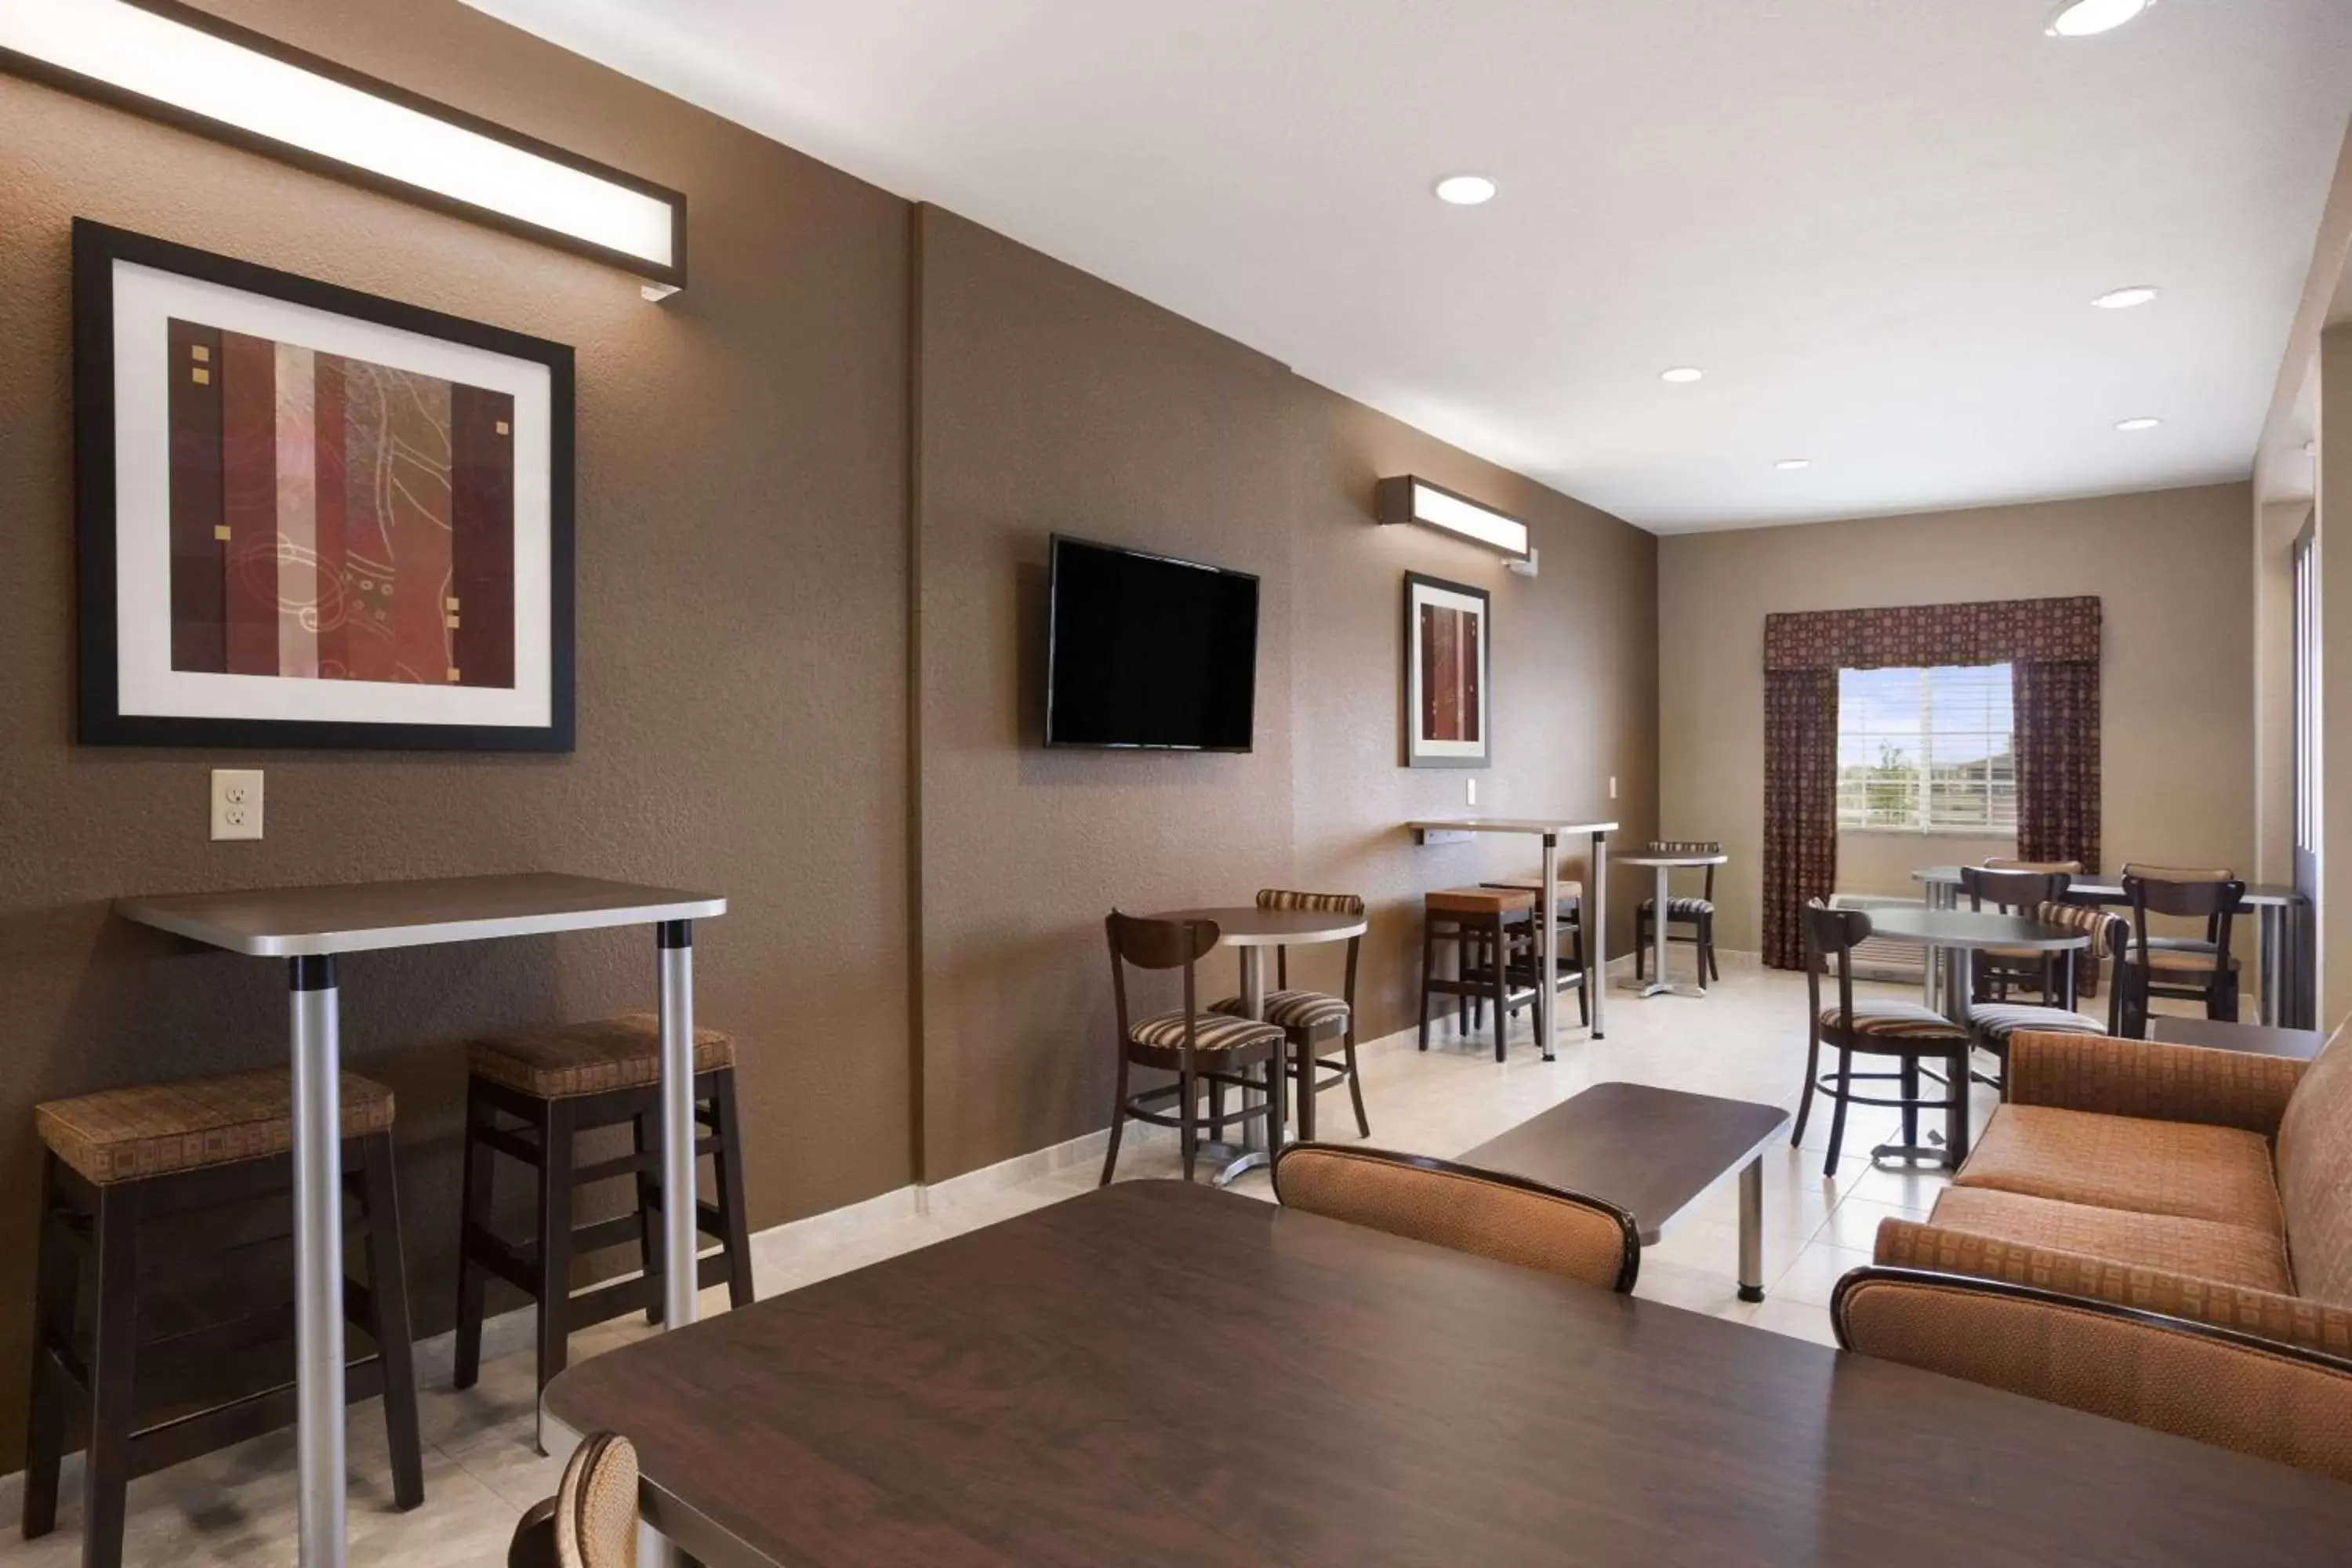 Lobby or reception in Microtel Inn & Suites Cotulla